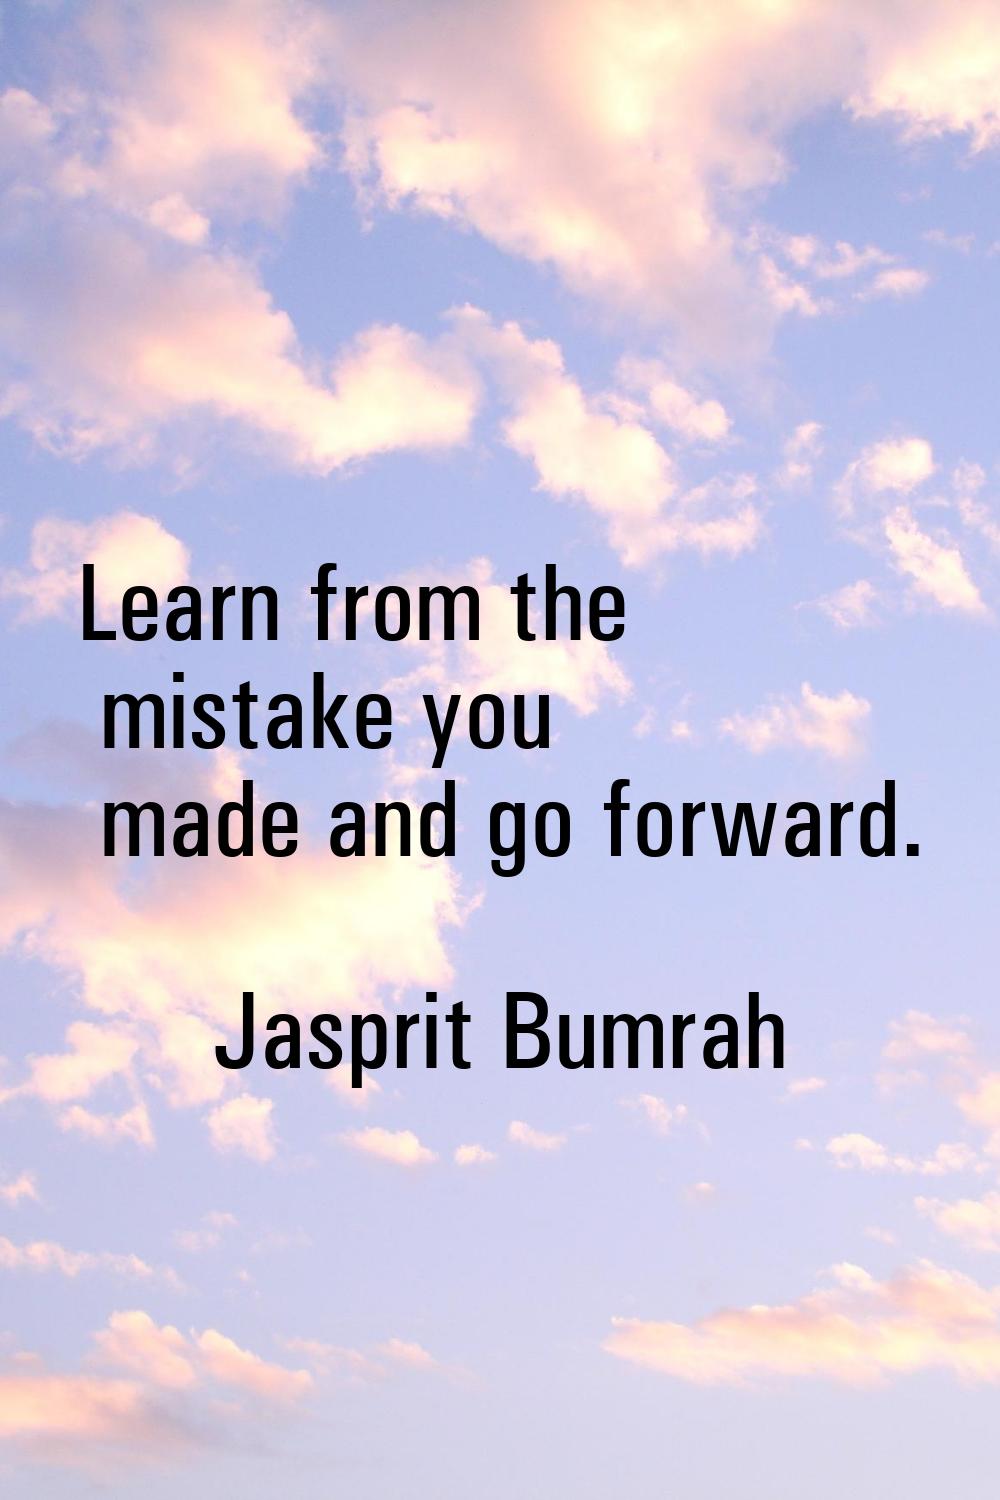 Learn from the mistake you made and go forward.